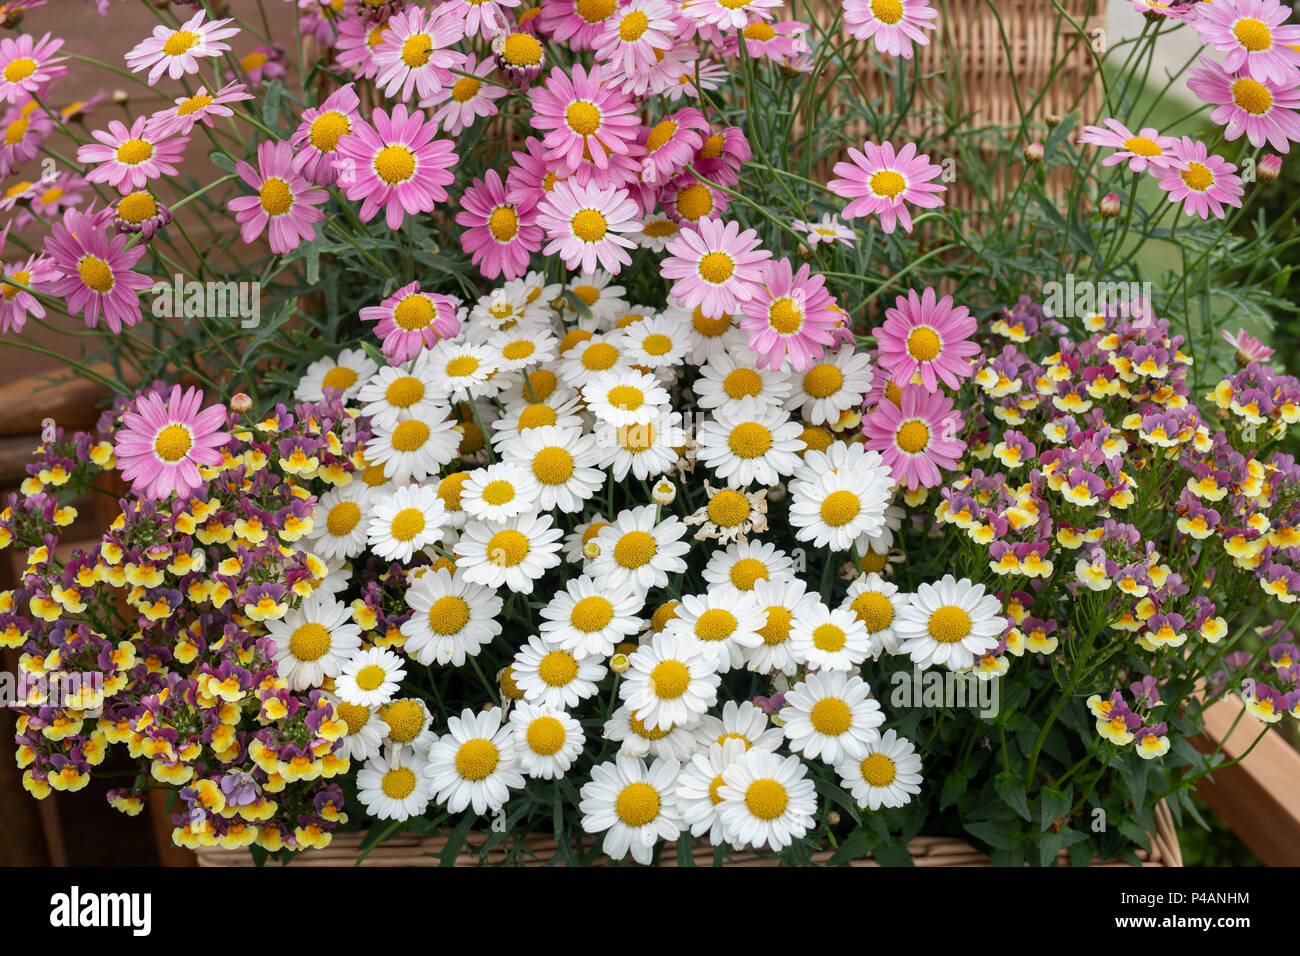 Argyranthemum frutescens. Pink and yellow Marguerite daisy flowers with Nemesia rhubarb and custard flowers on a display at a flower show. UK Stock Photo